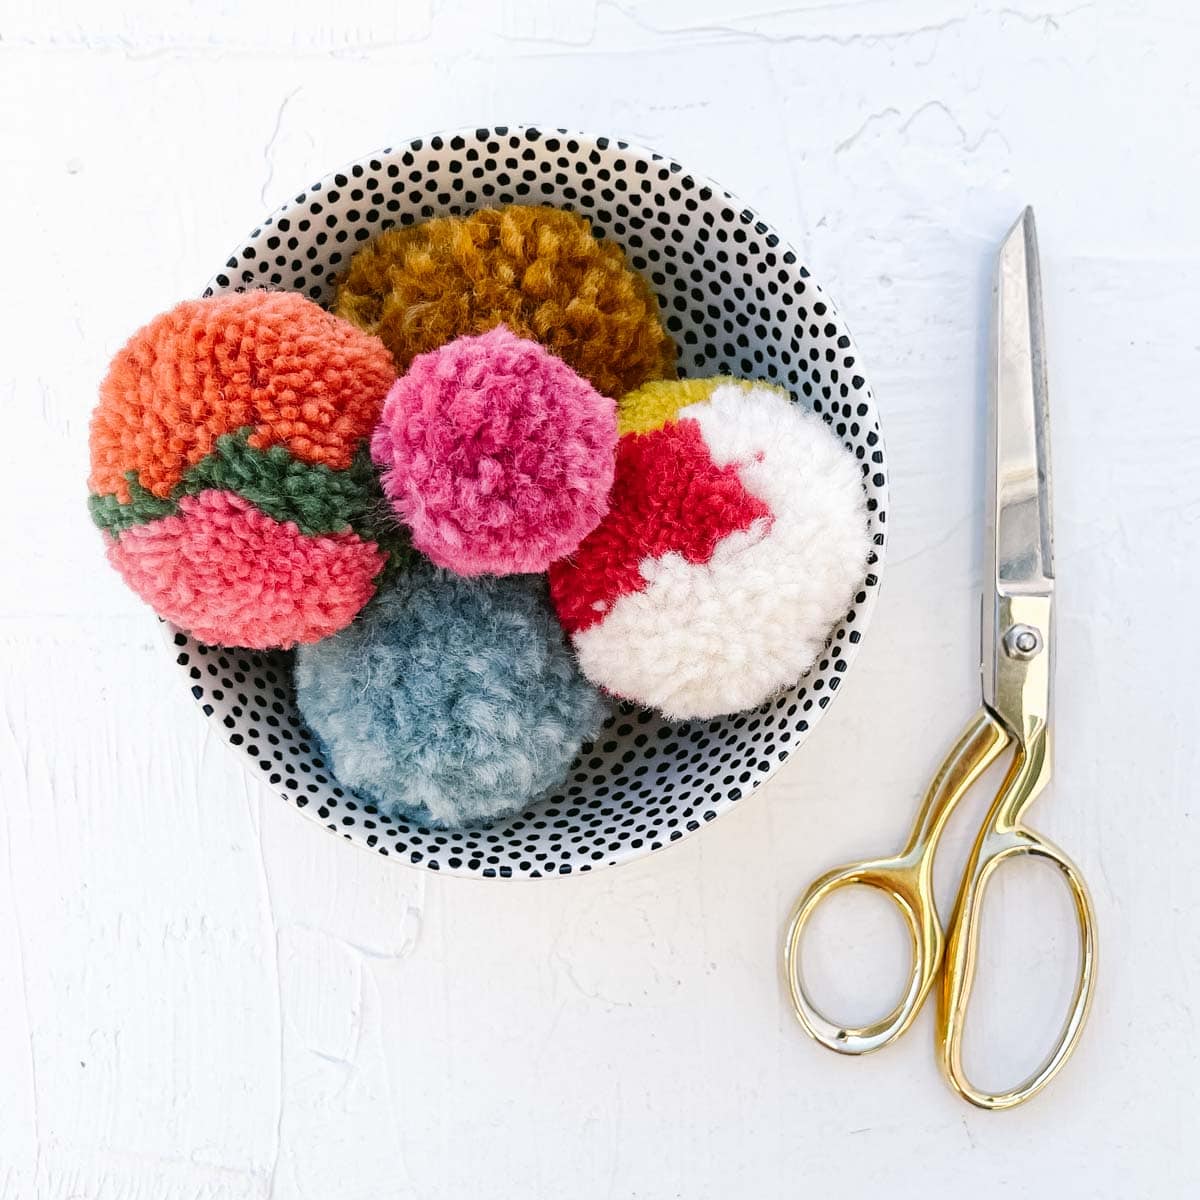 How to Make Pom Poms: Tutorial for Knit & Crochet Hats, + More